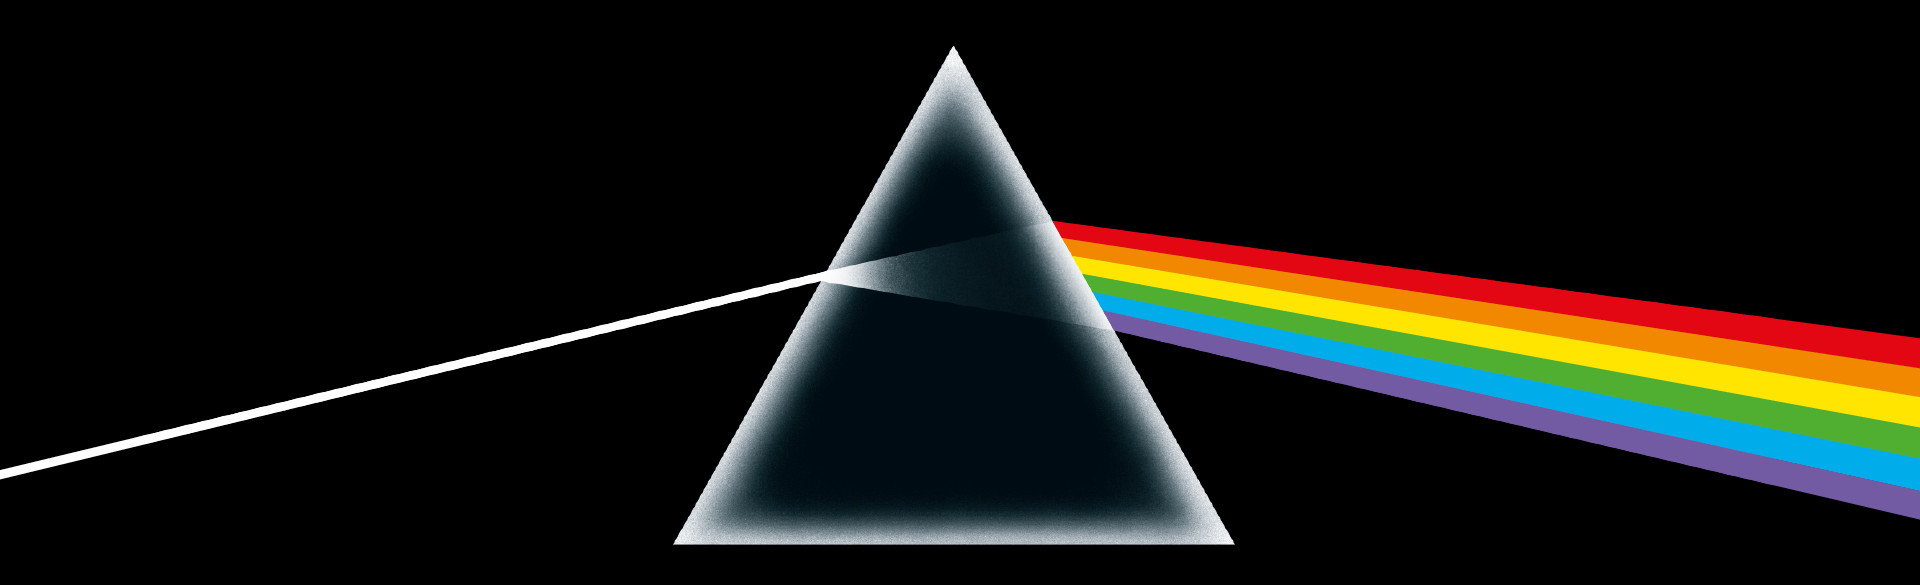 Pink Floyds Dark Side of the Moon, © experimenta